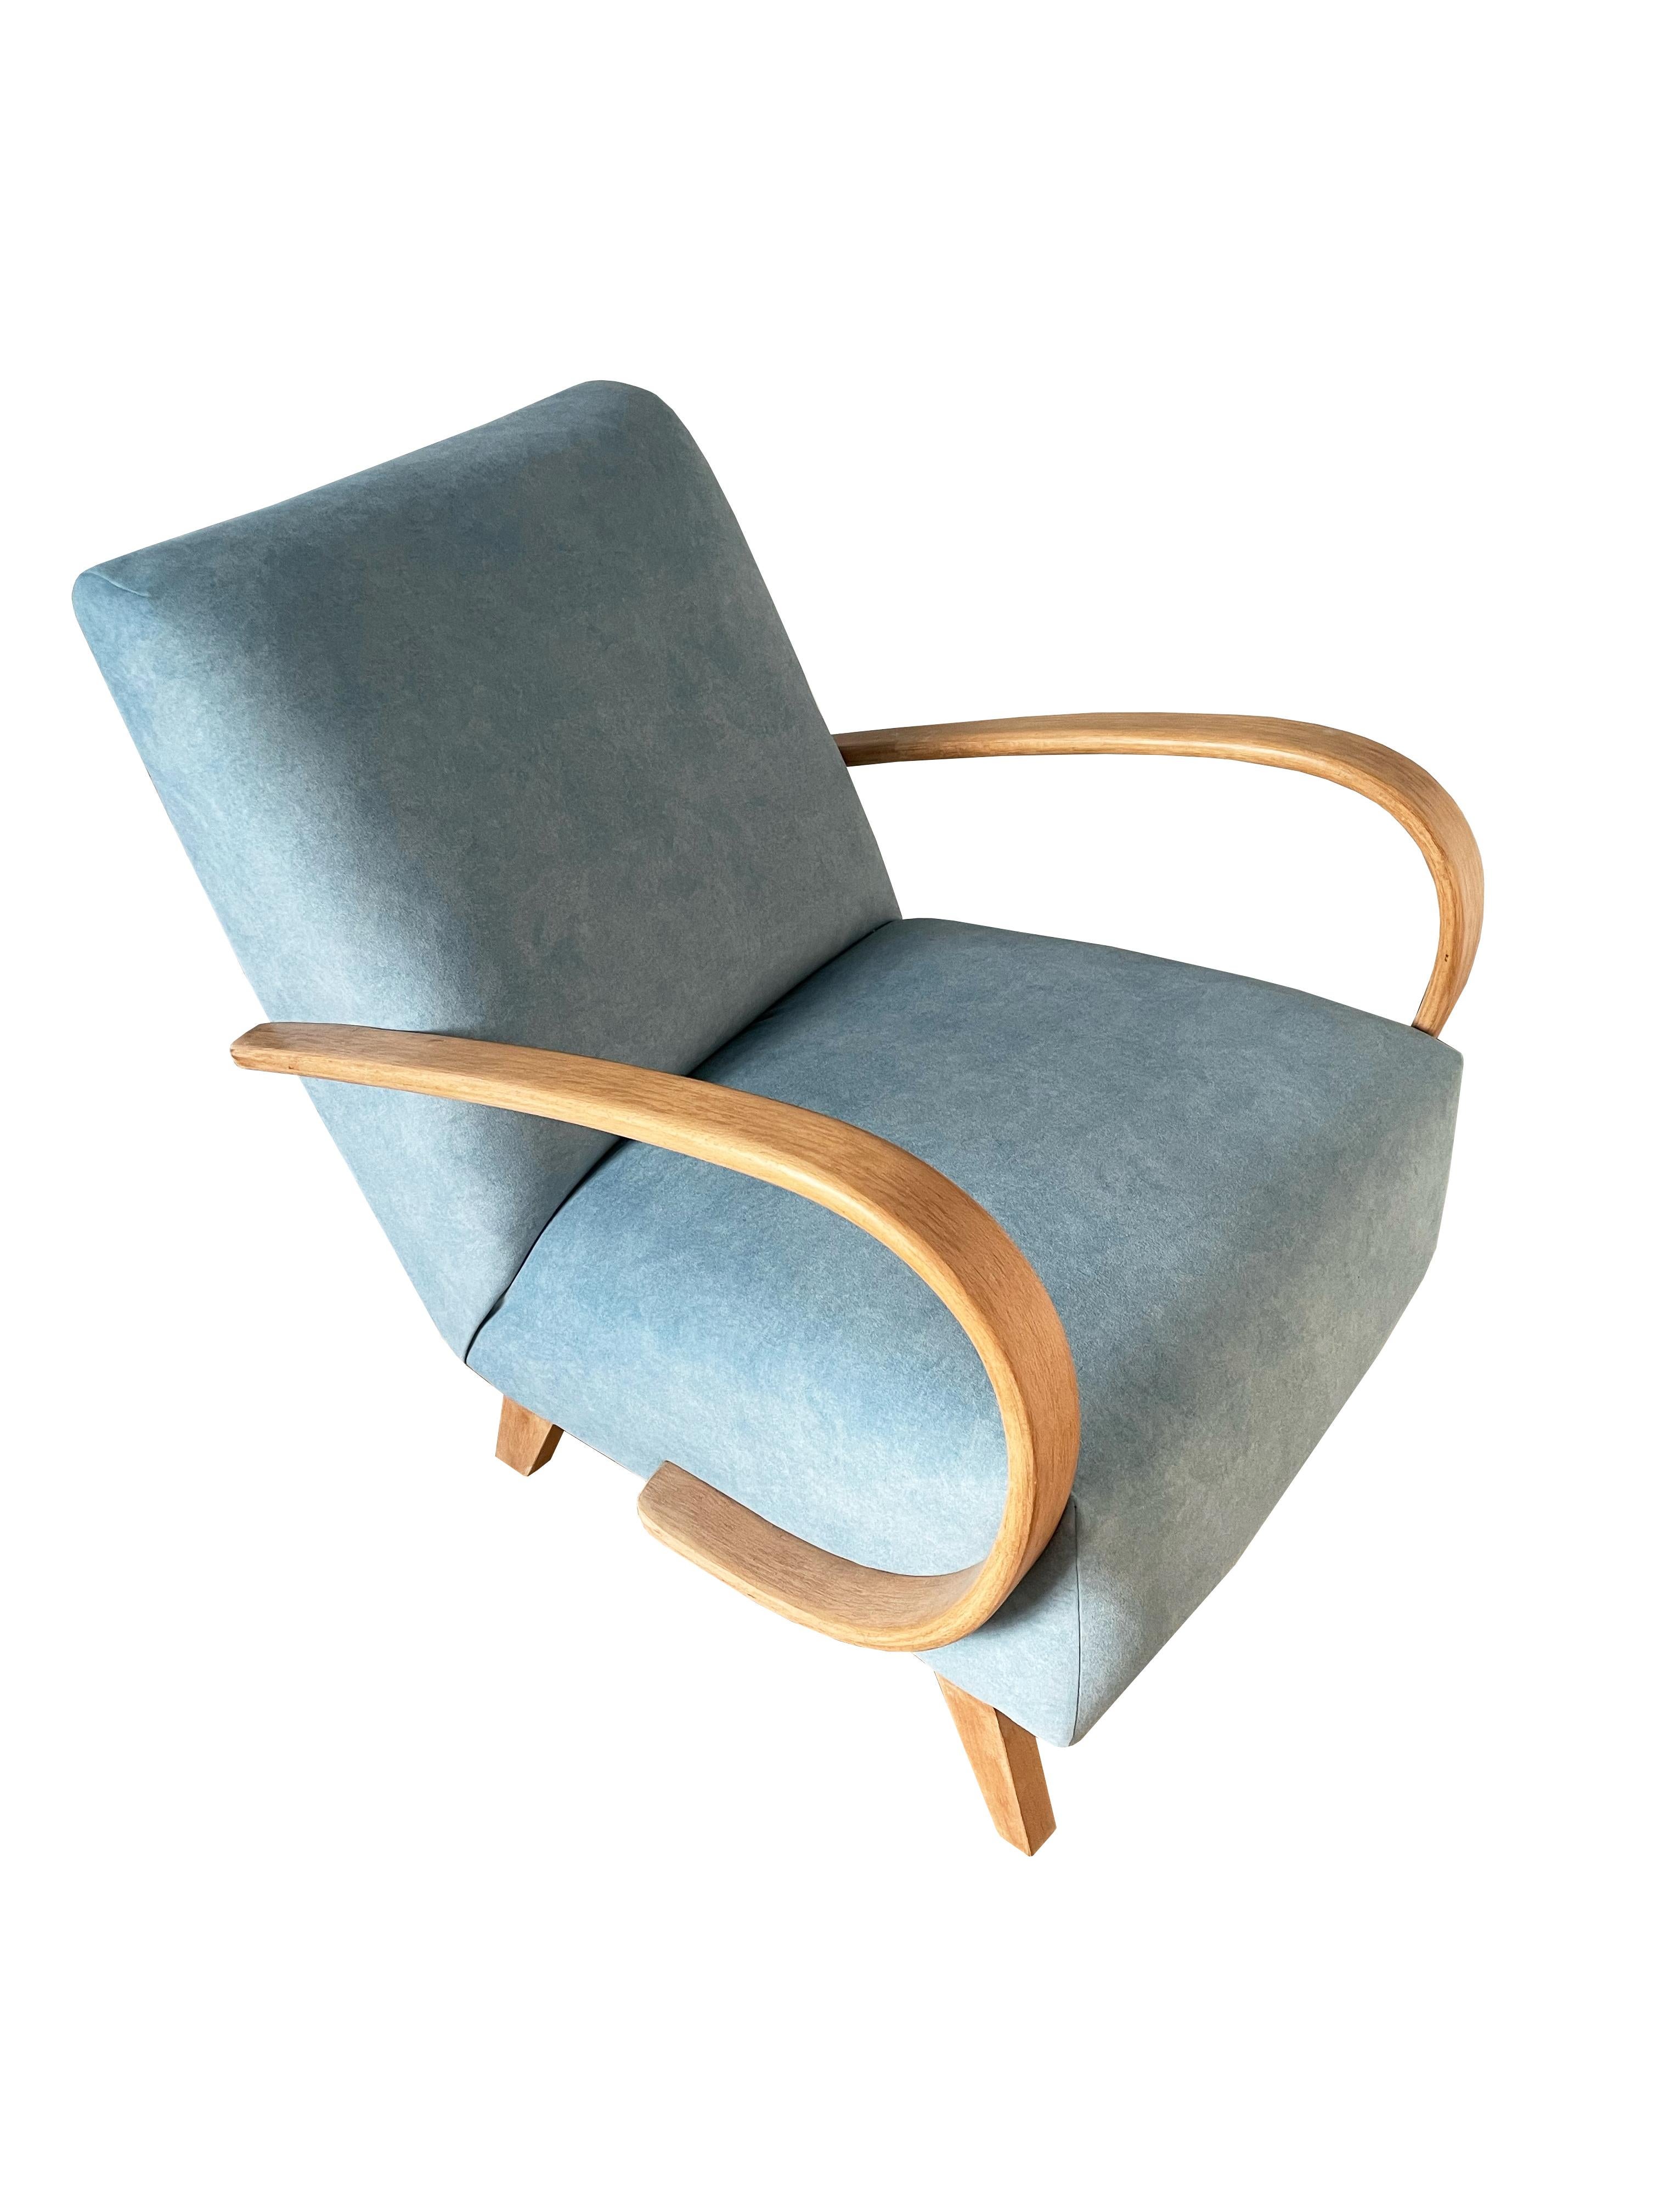 Hand-Crafted Mid-Century Blue Velvet Armchair by J. Halabala, Czech Republic, 1950s For Sale